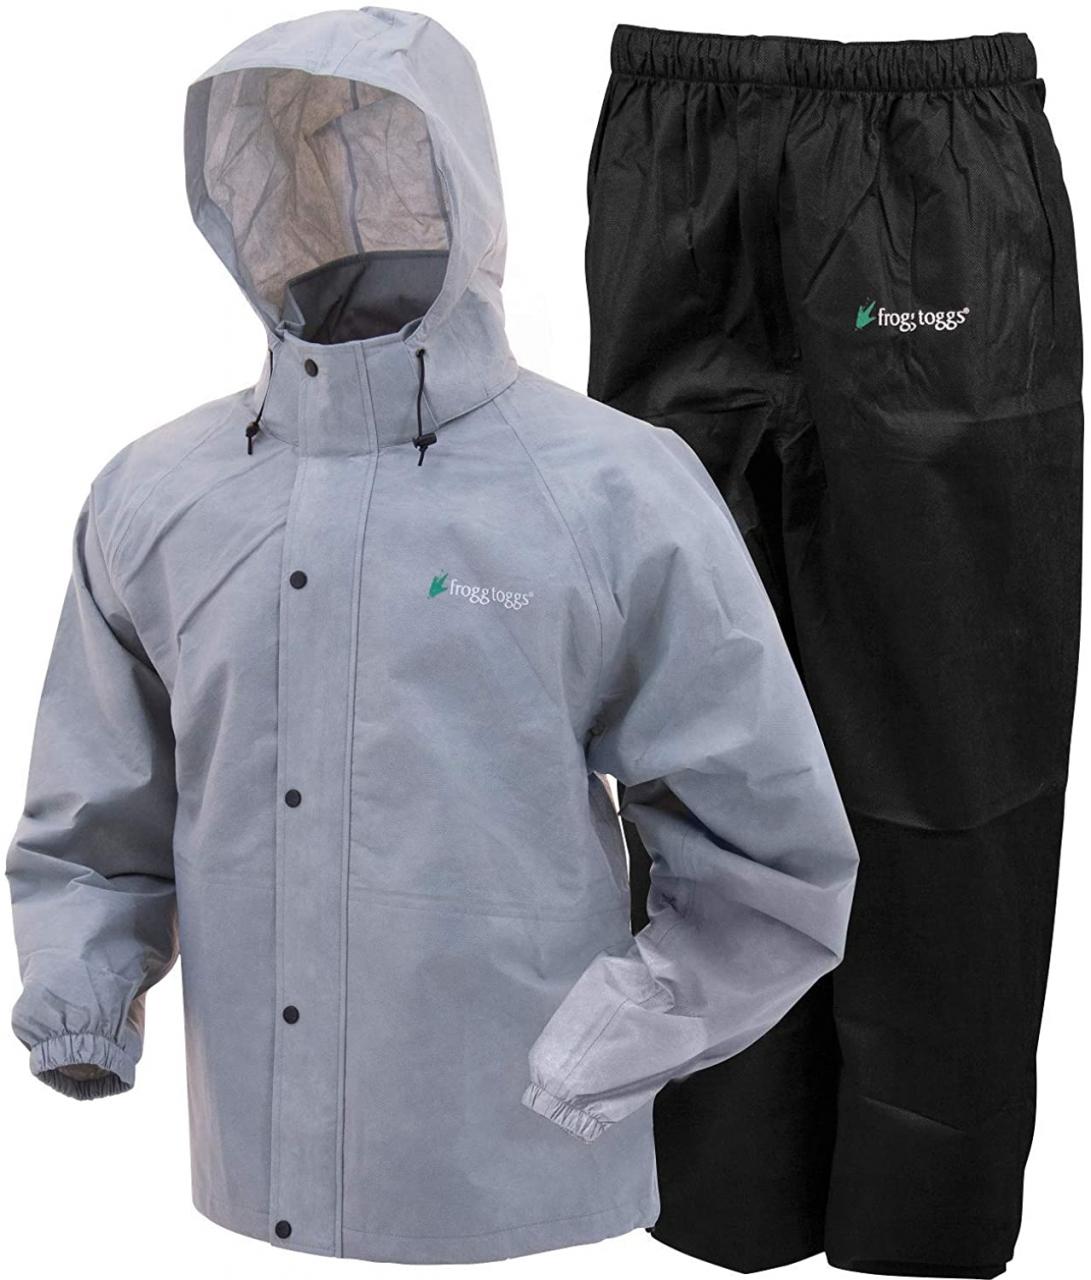 Frogg Toggs All Sport Rain Suit: Review - 50 Campfires